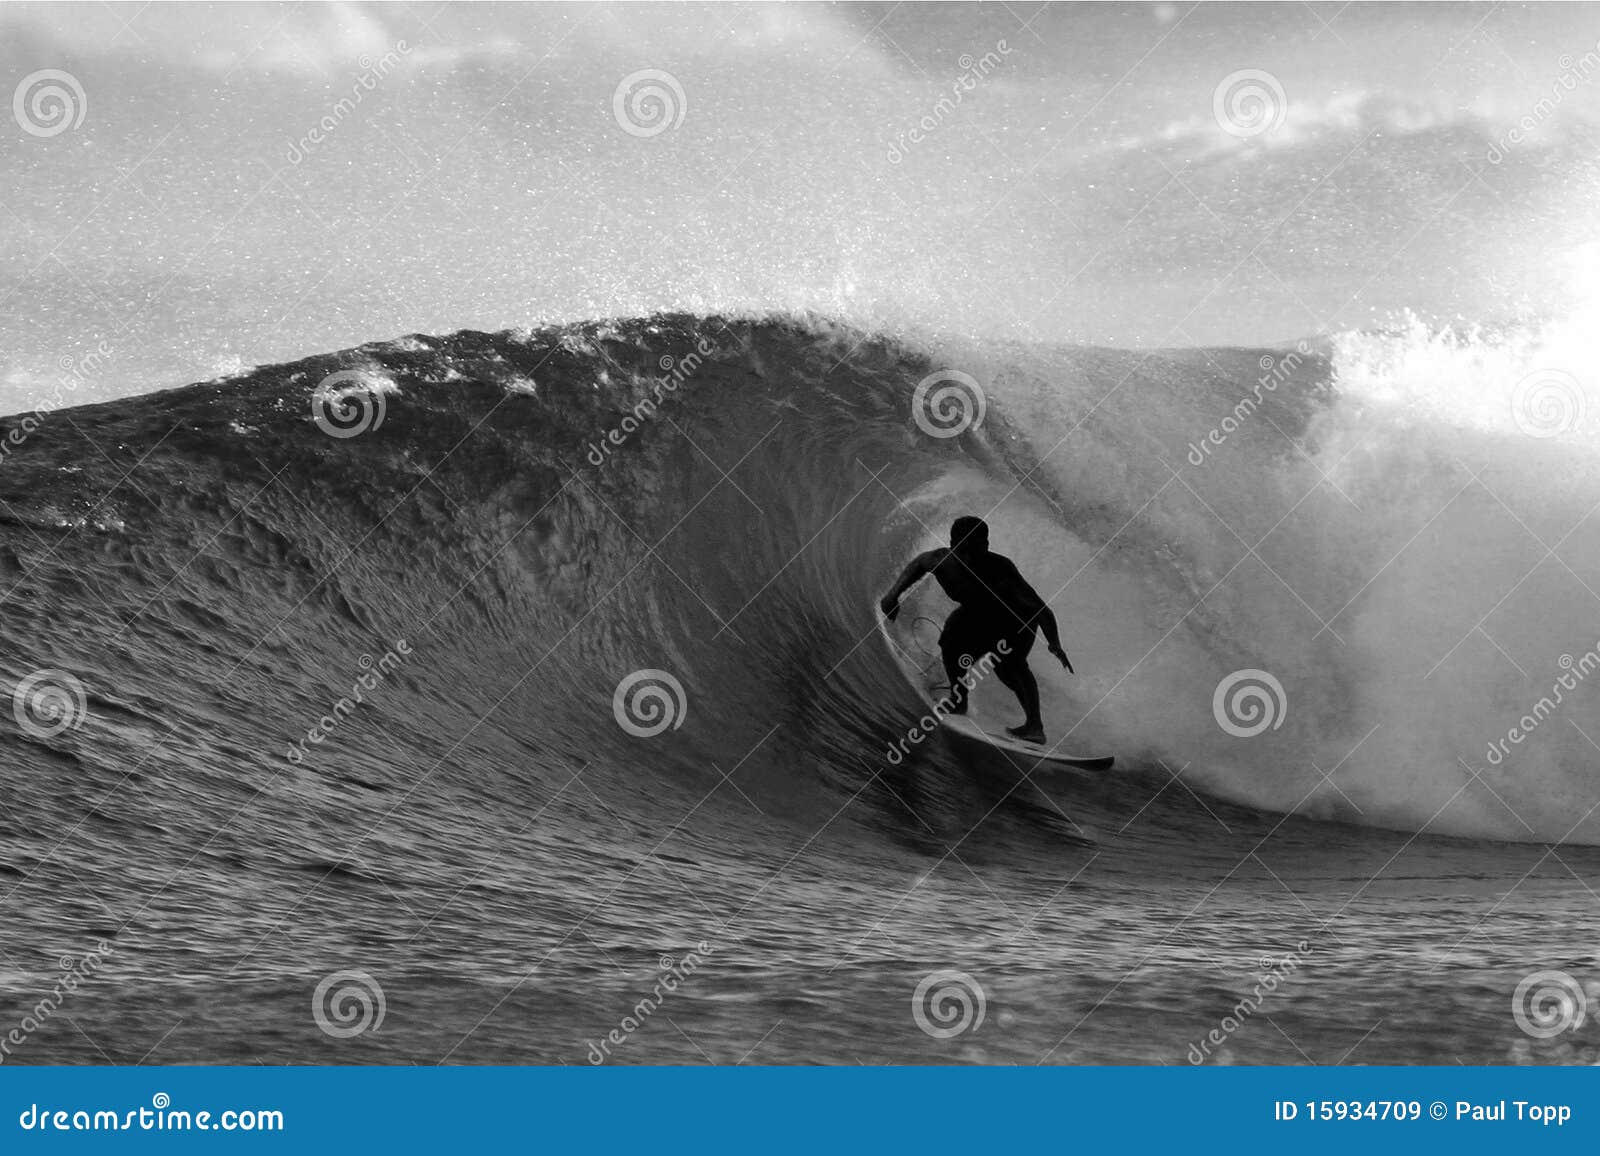 black and white surfer surfing the tube